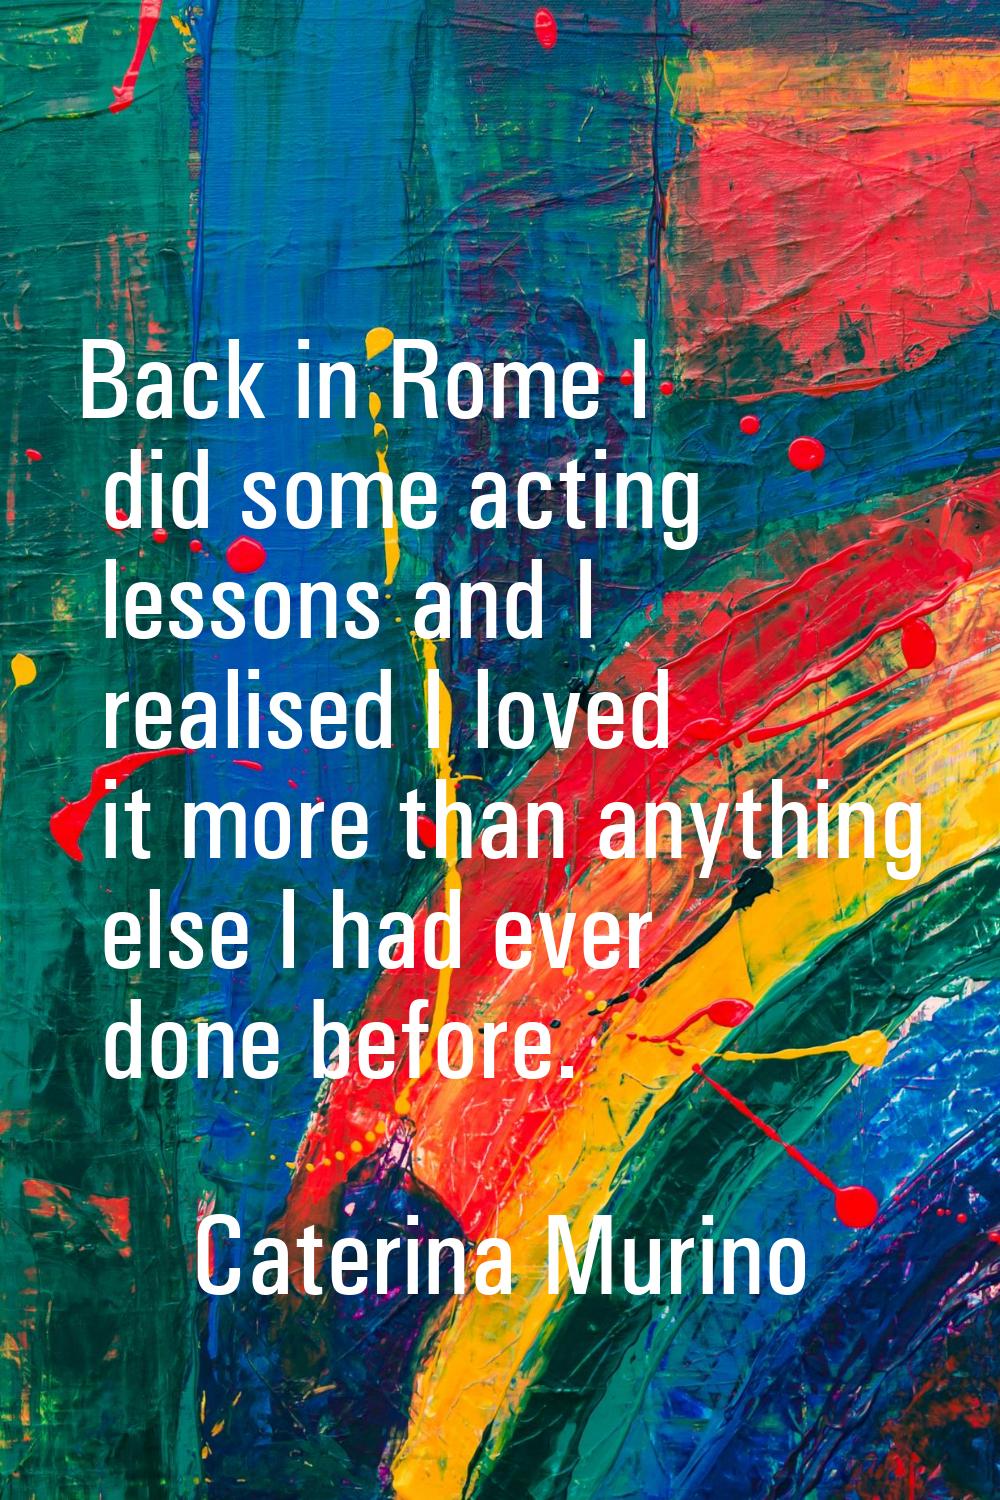 Back in Rome I did some acting lessons and I realised I loved it more than anything else I had ever